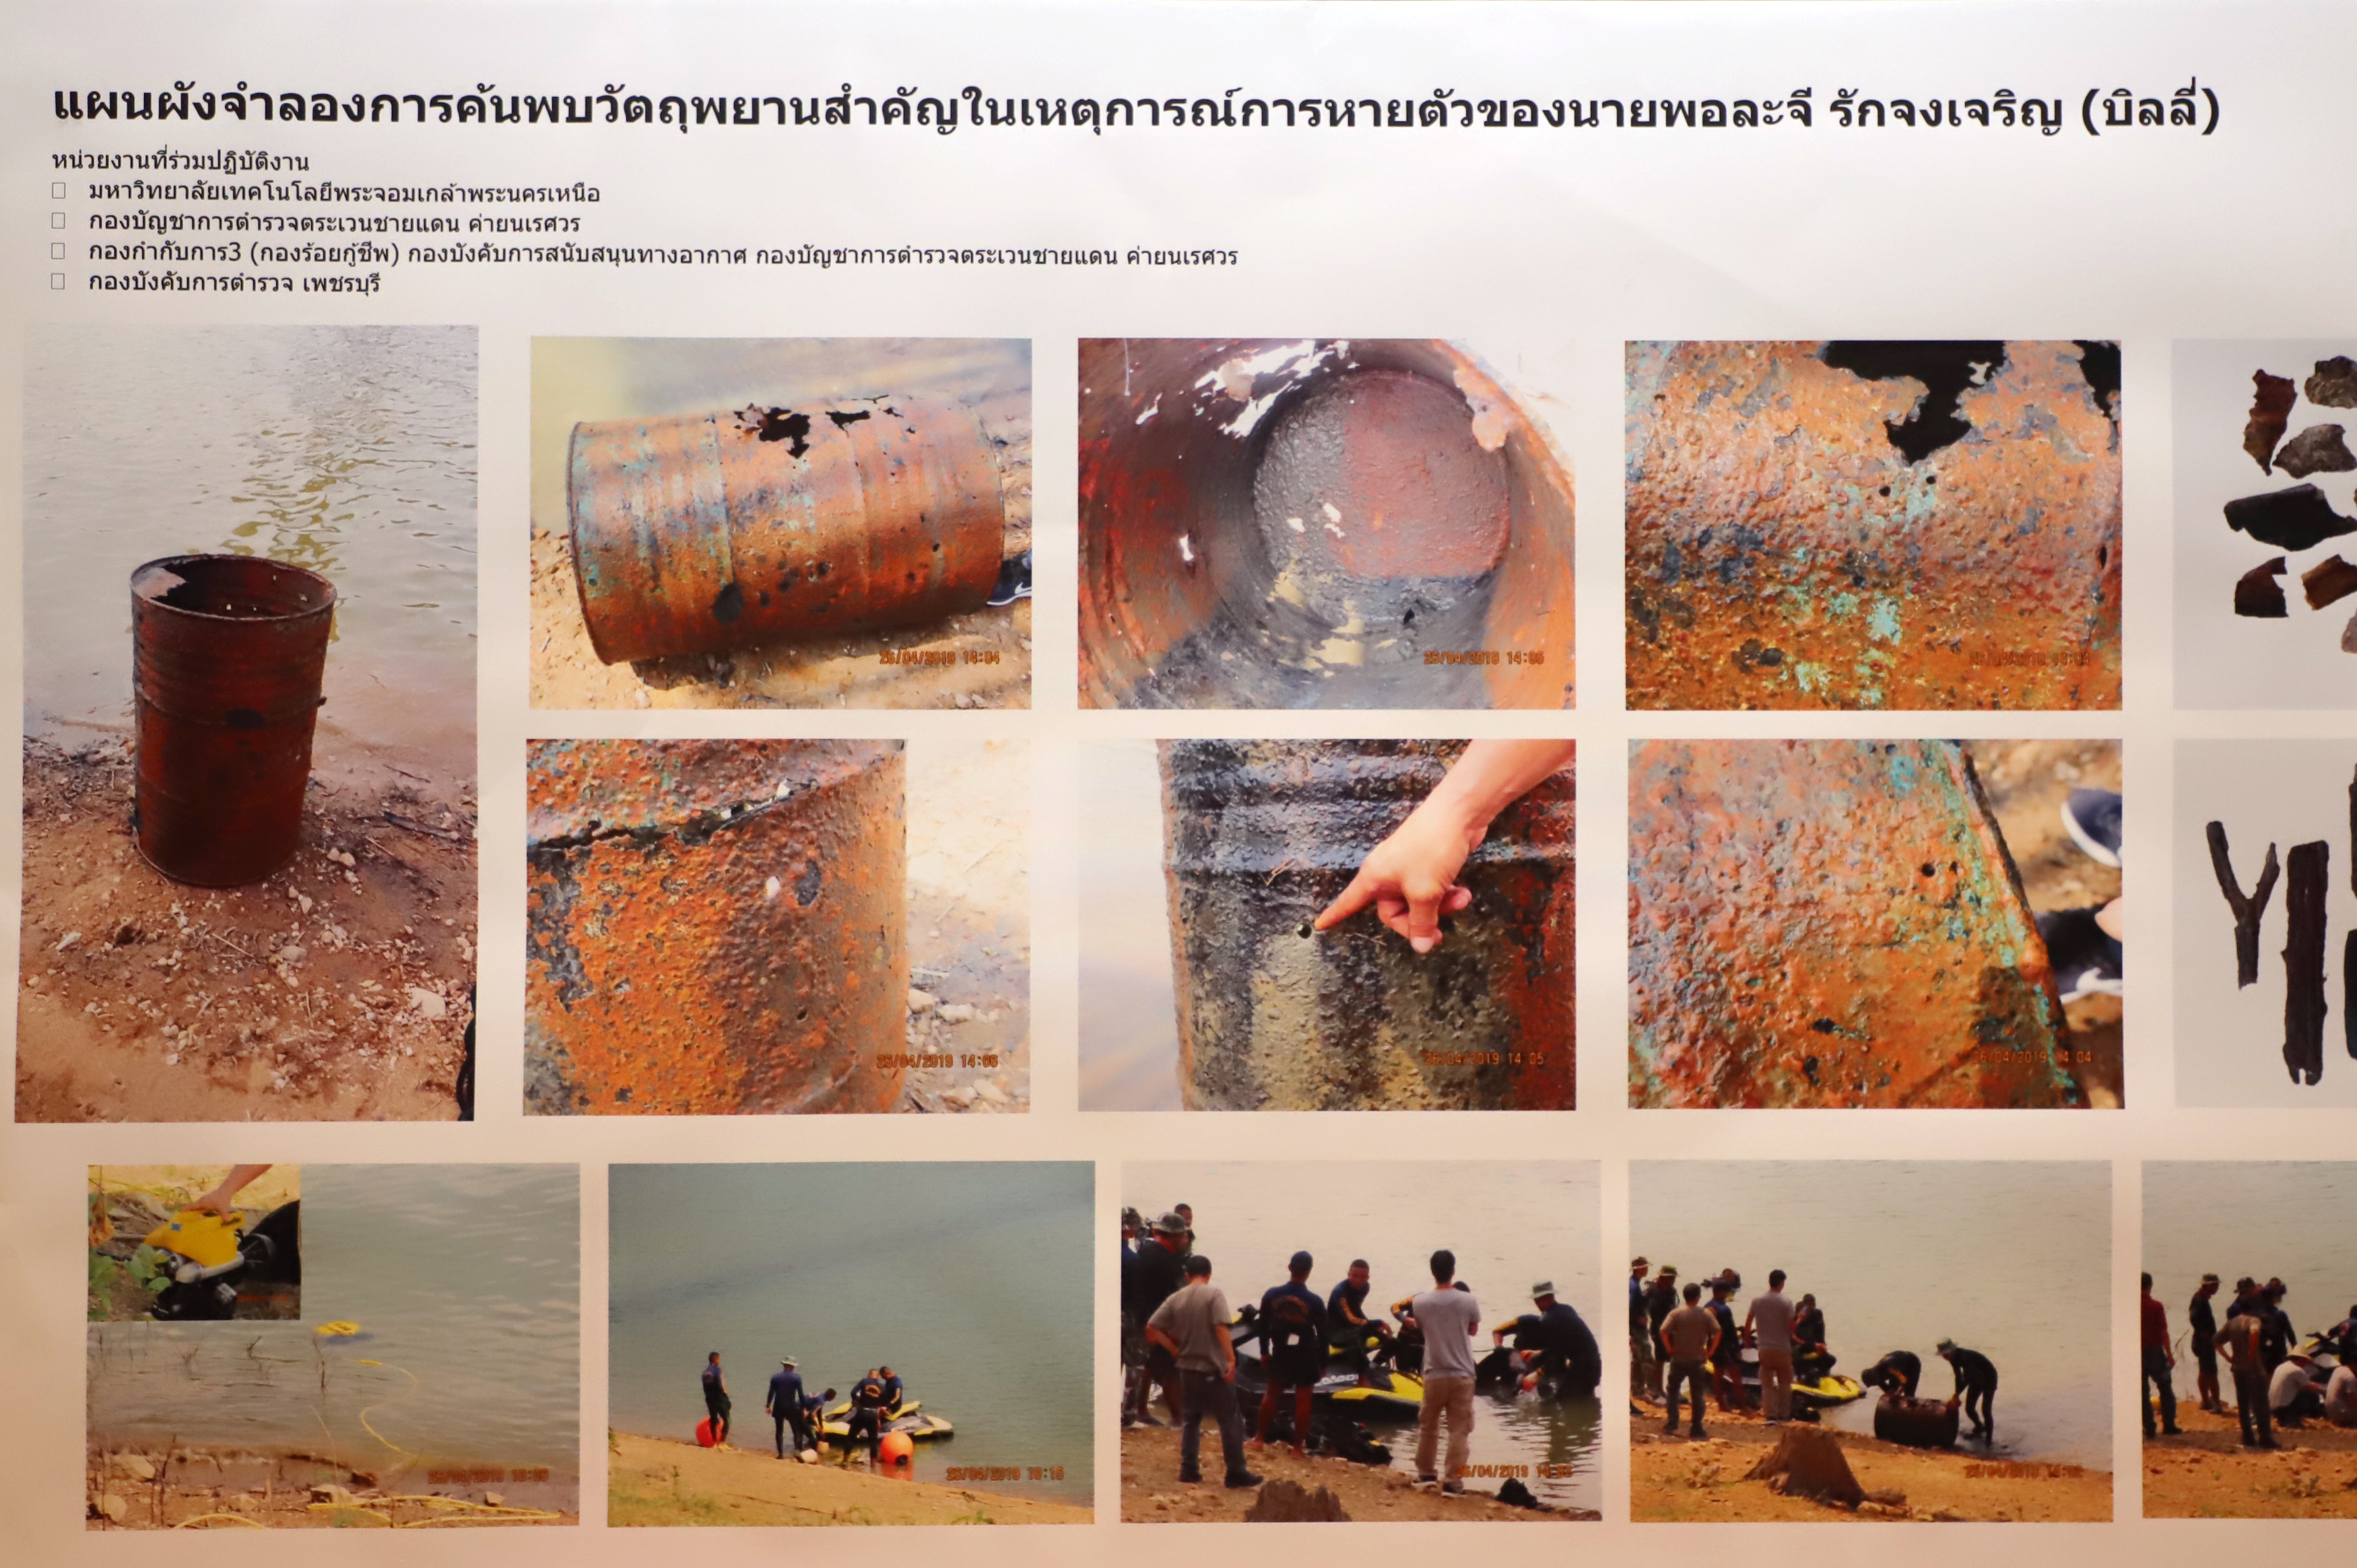 Photos of the oil drum found at the scene.